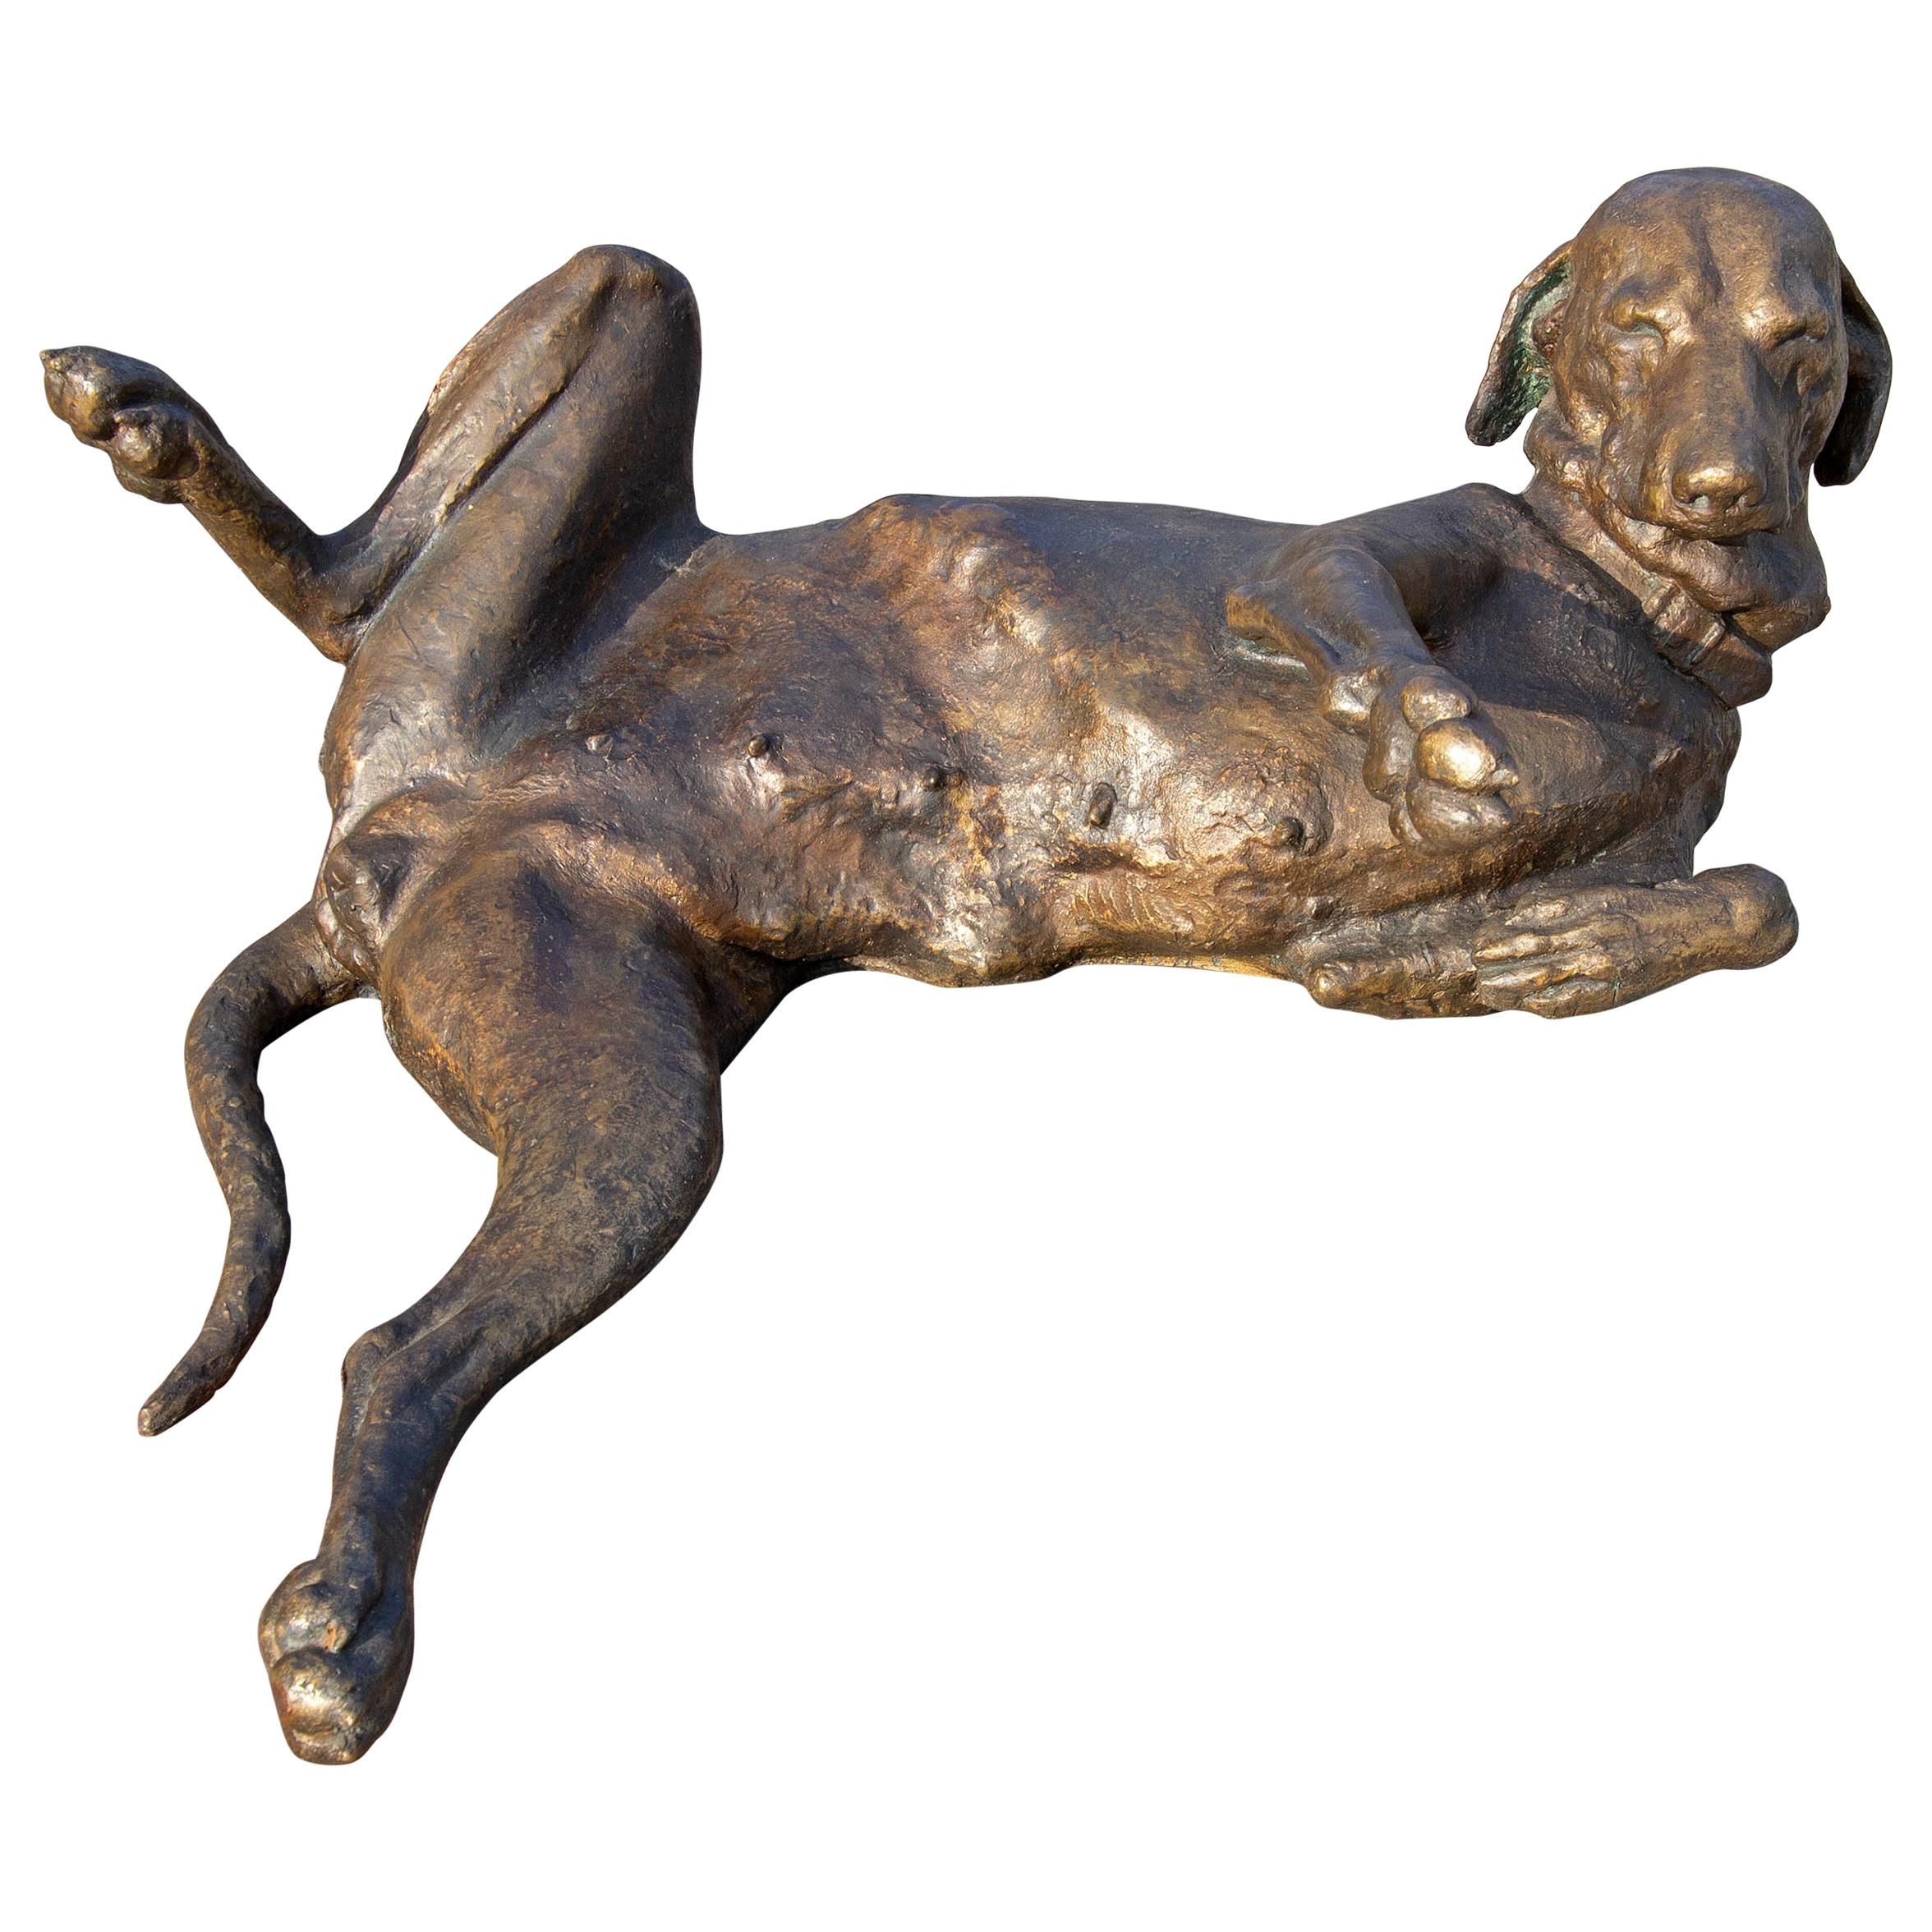 Life-size bronze dog by Czech artist Petr Sidivy. Dated 1990. Sculpture was done while Sidivy was teaching at The University of Buffalo on a Fulbright scholarship.
The sculptor Petr Šedivý was born in 1948 in Prague. He graduated from prof. Karel